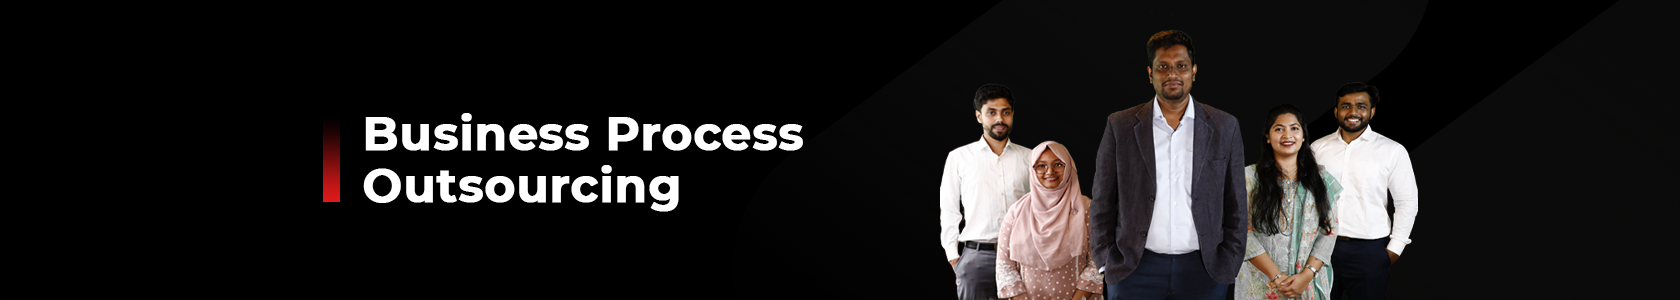 Business Process
            Outsourcing